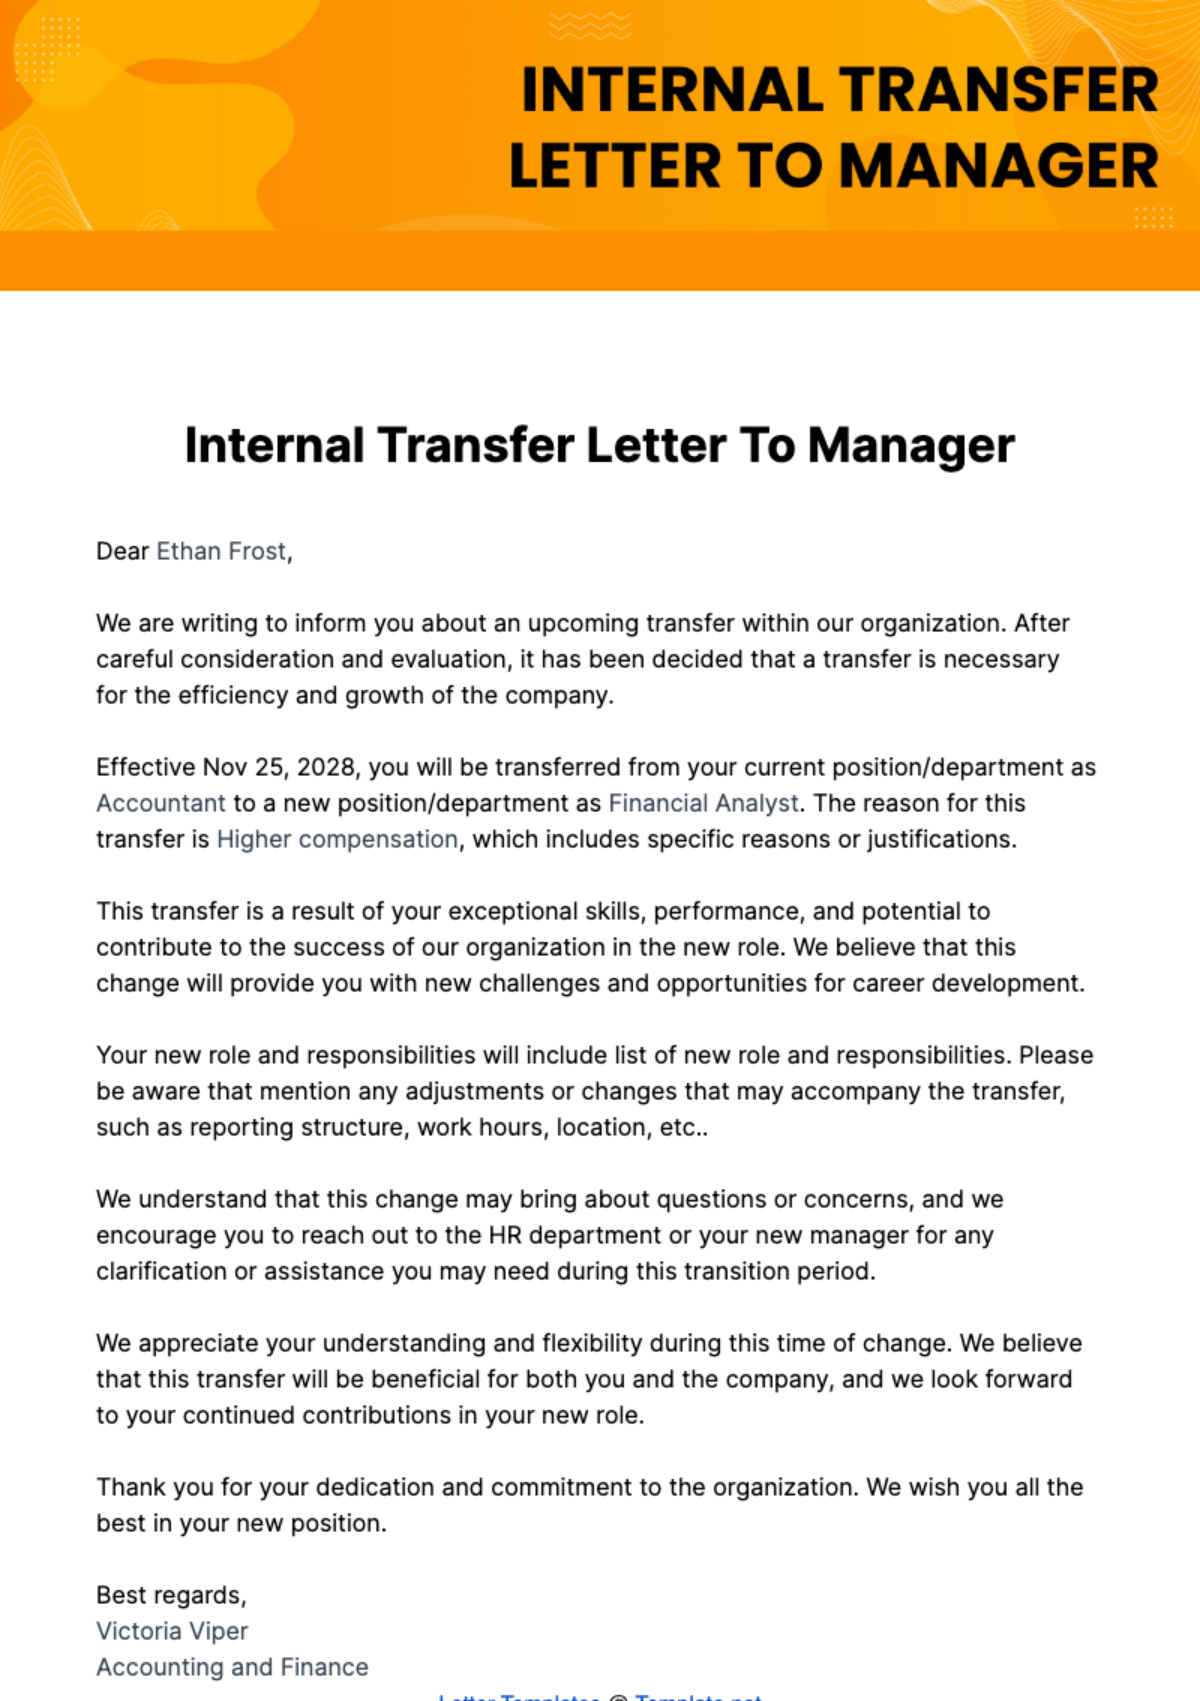 Internal Transfer Letter To Manager Template